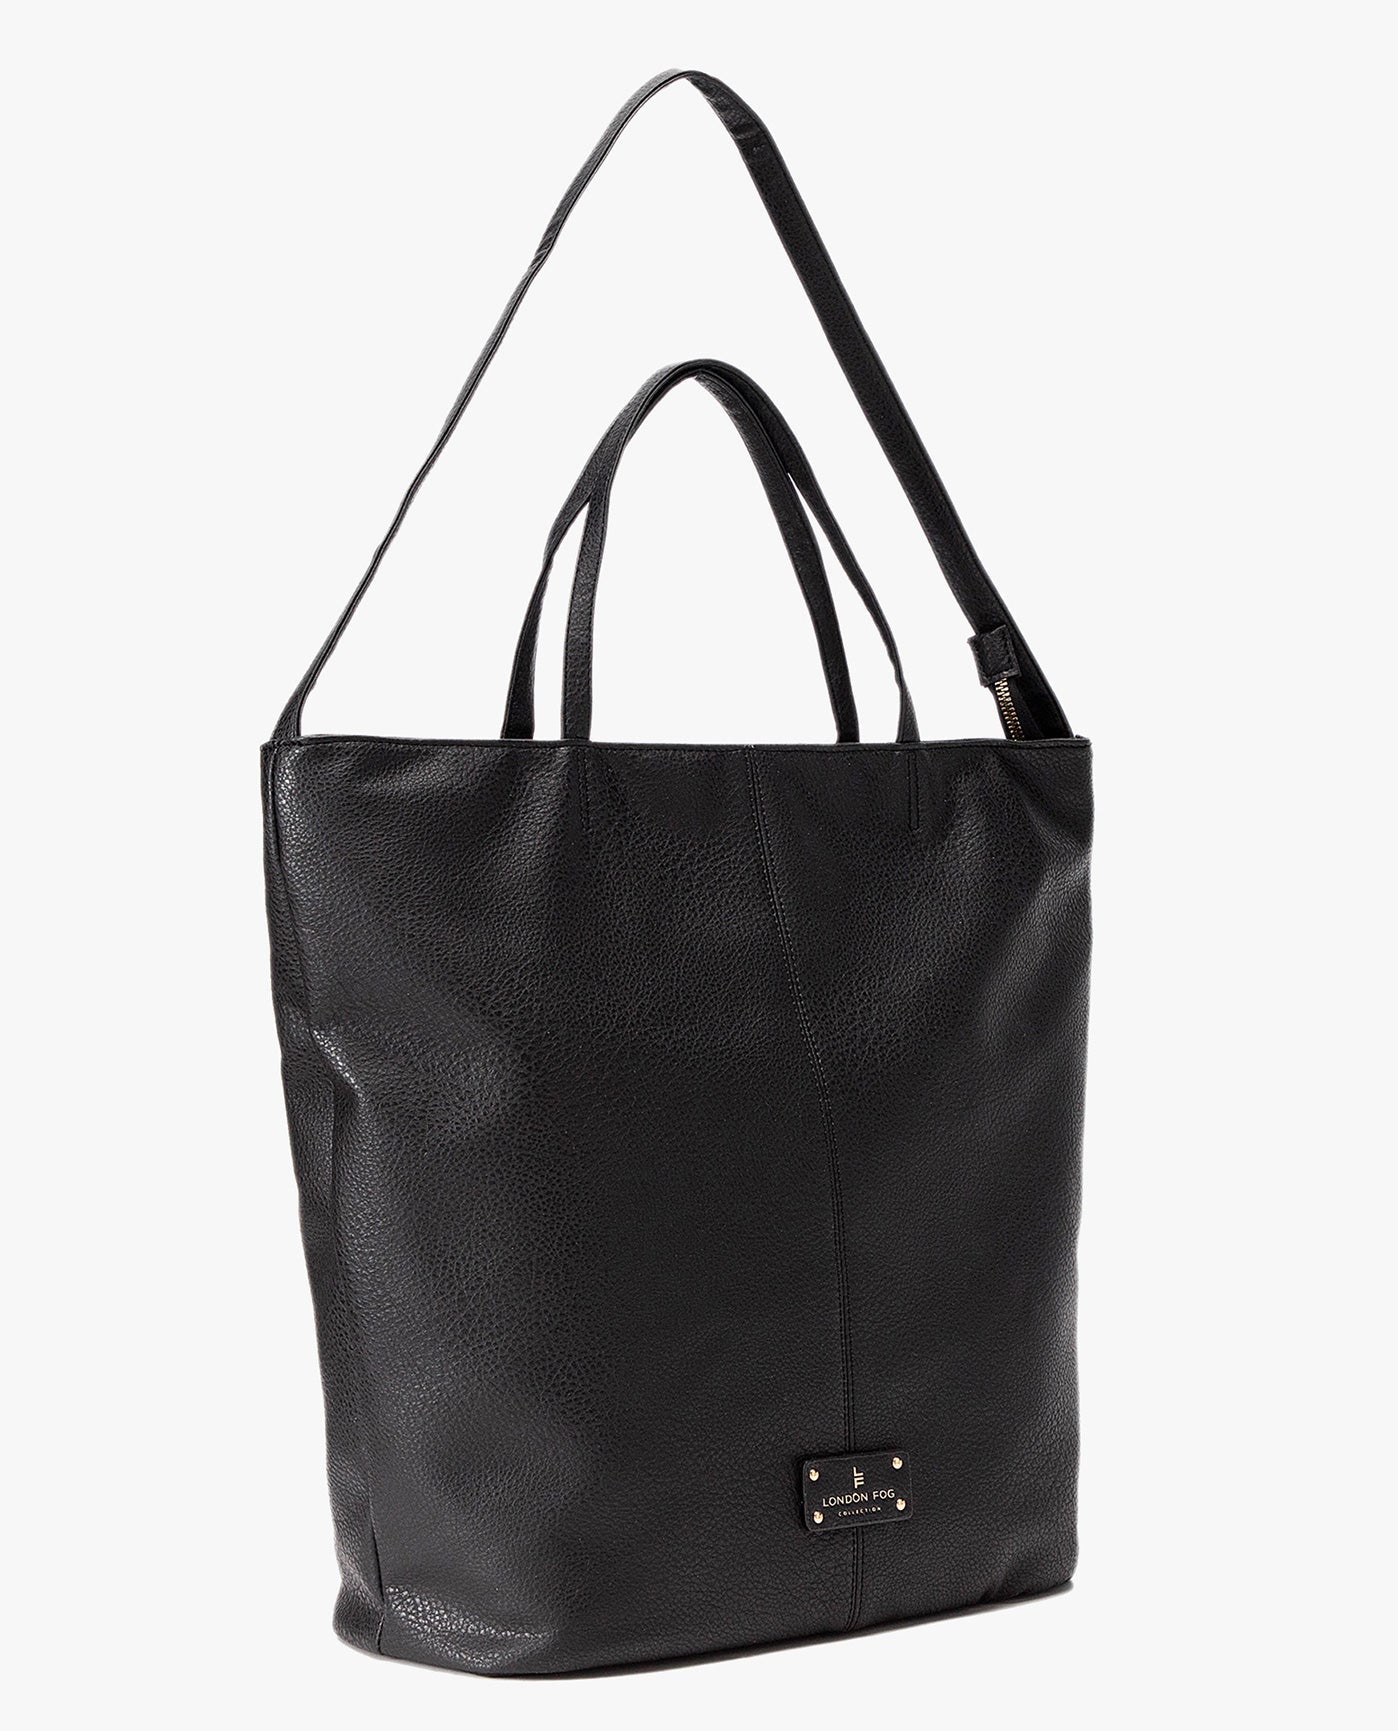 SIDE VIEW OF LAURA LARGE TOTE | BLACK